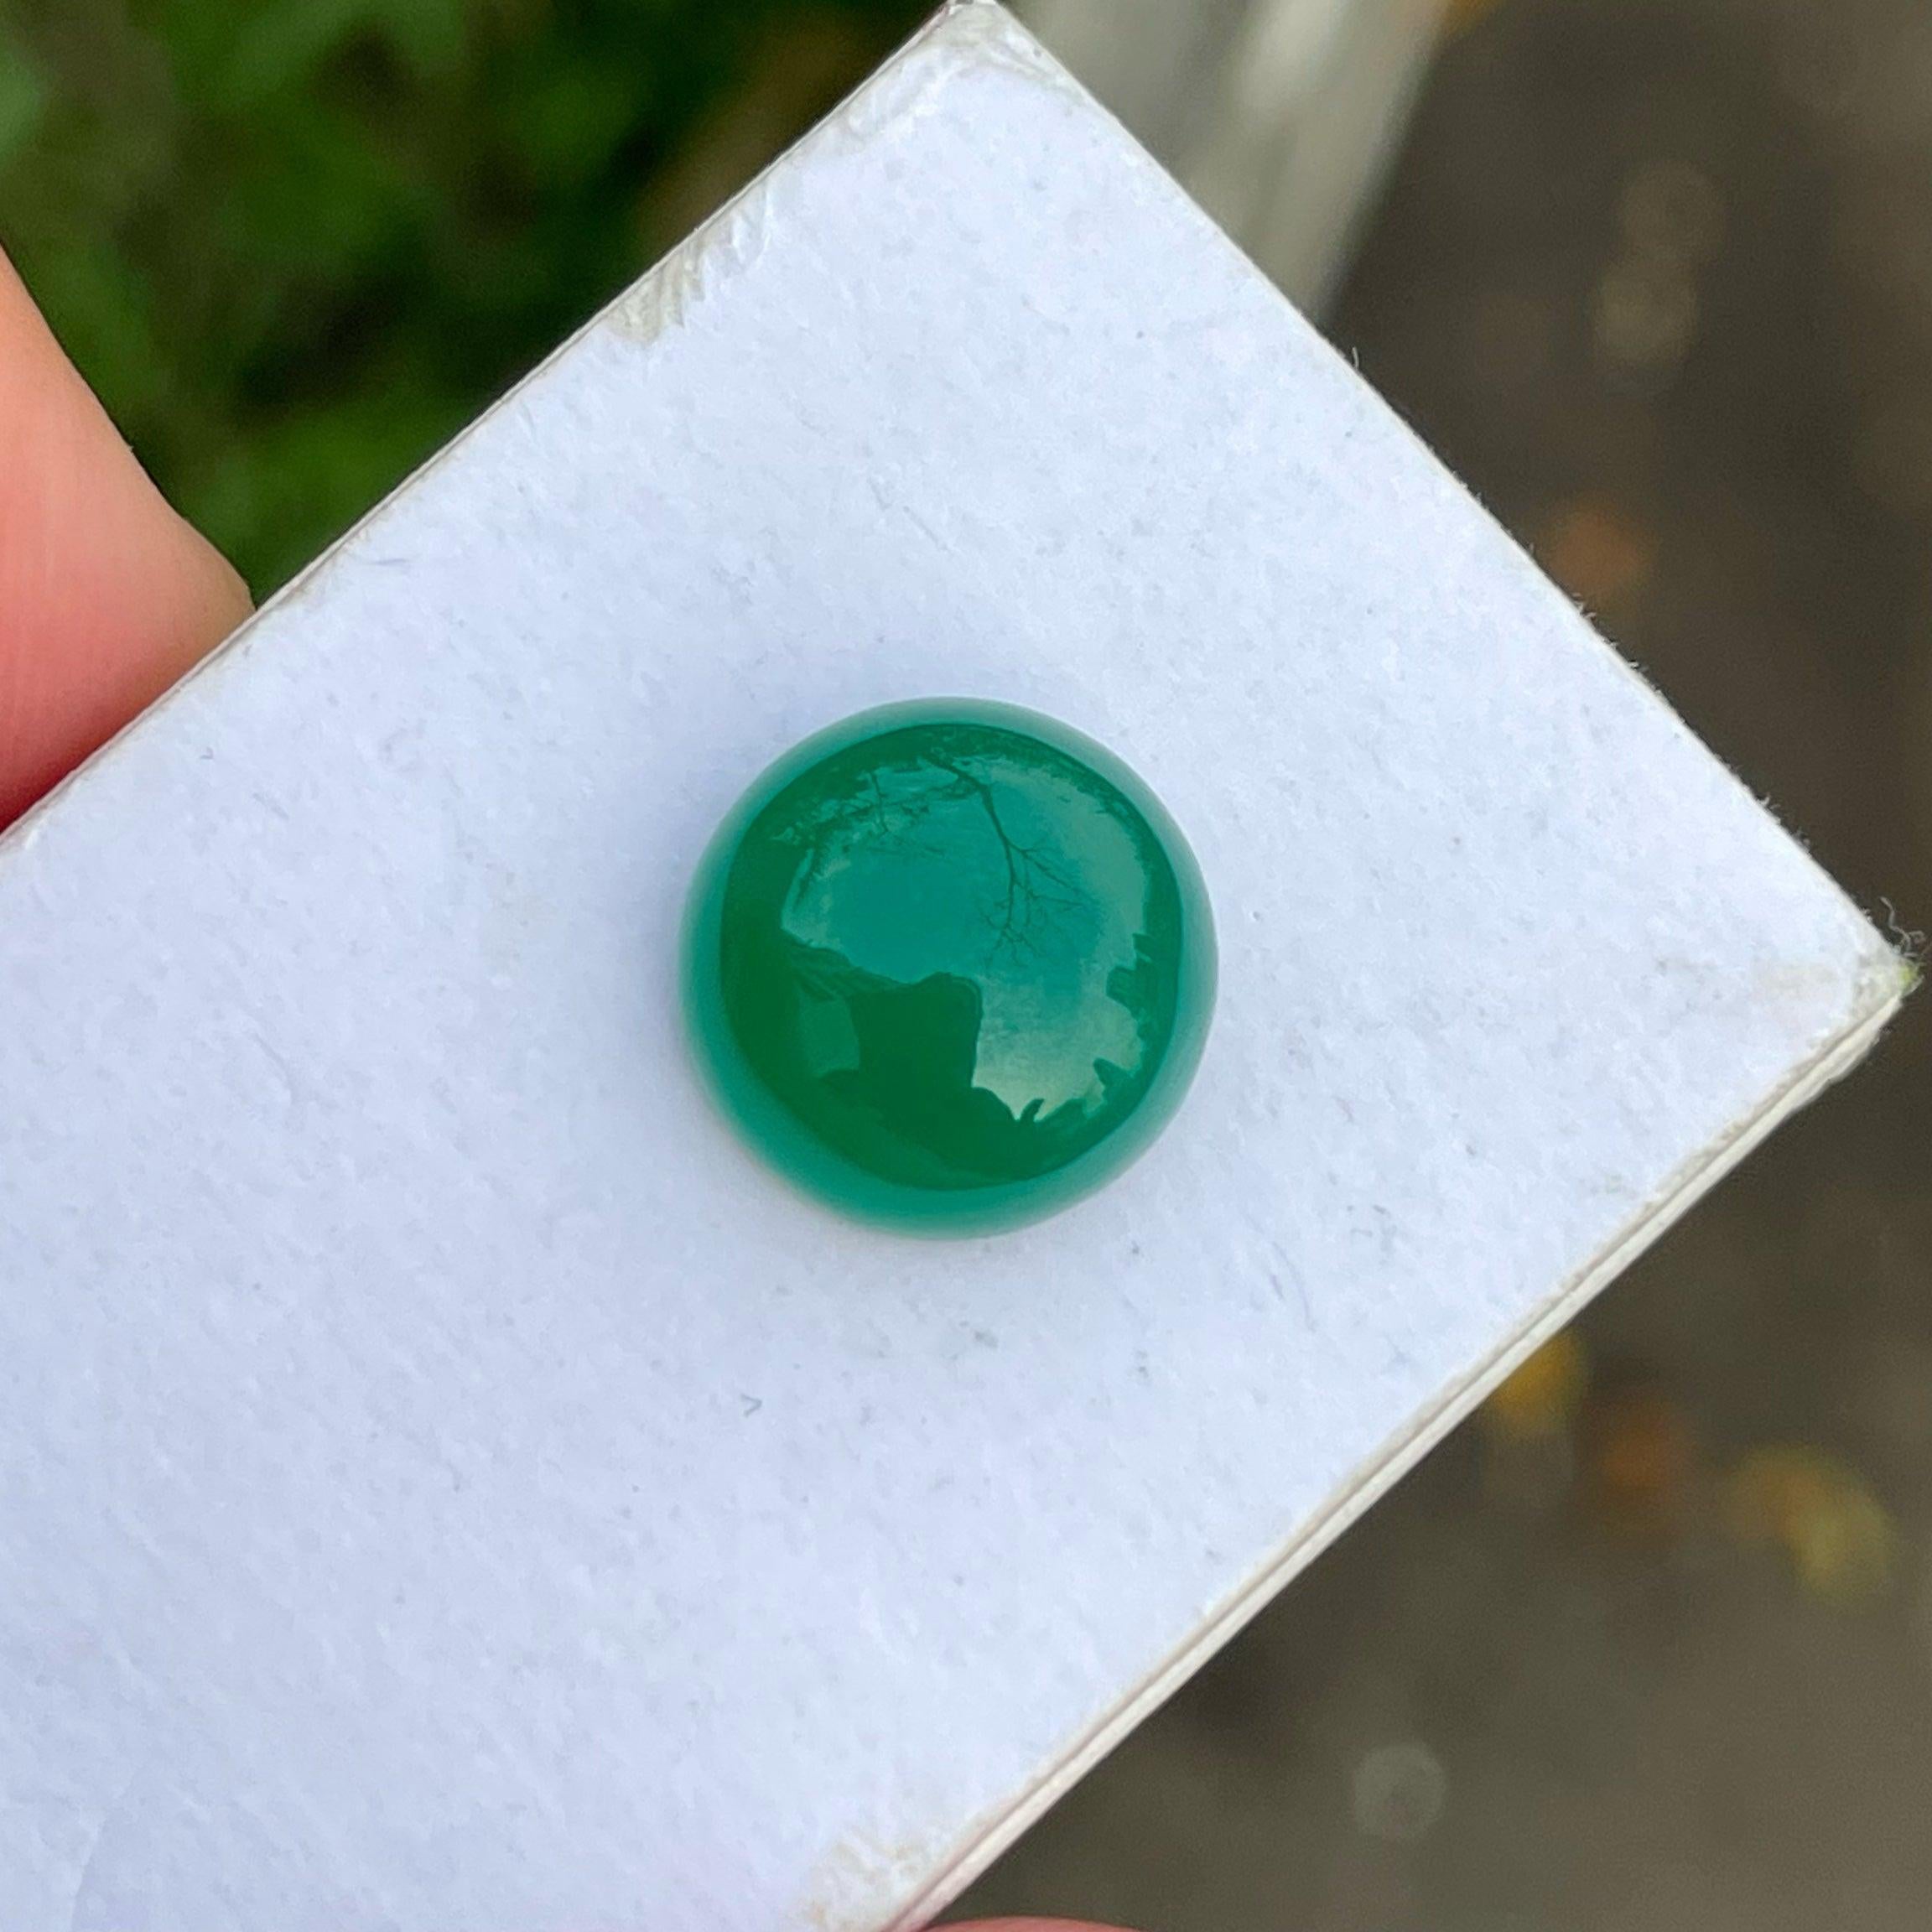 Gorgeous Natural Green Agate Gemstone, available for sale at wholesale price, natural high-quality 6.75 carats flawless Transparency Translucent clarity, certified Moonstone from India.

Product Information:
GEMSTONE NAME: Gorgeous Natural Green